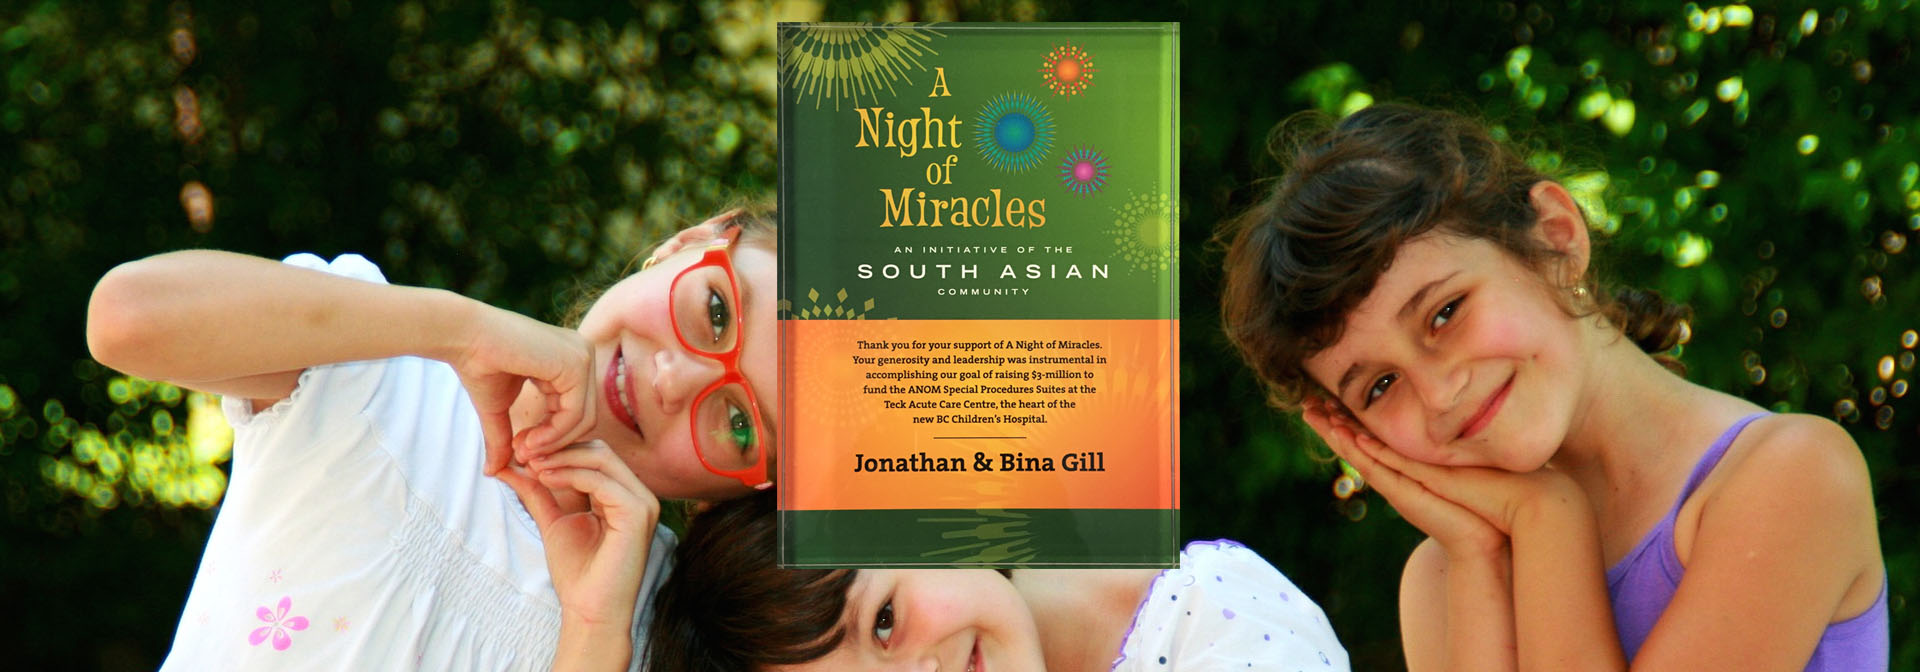 Night of Miracles